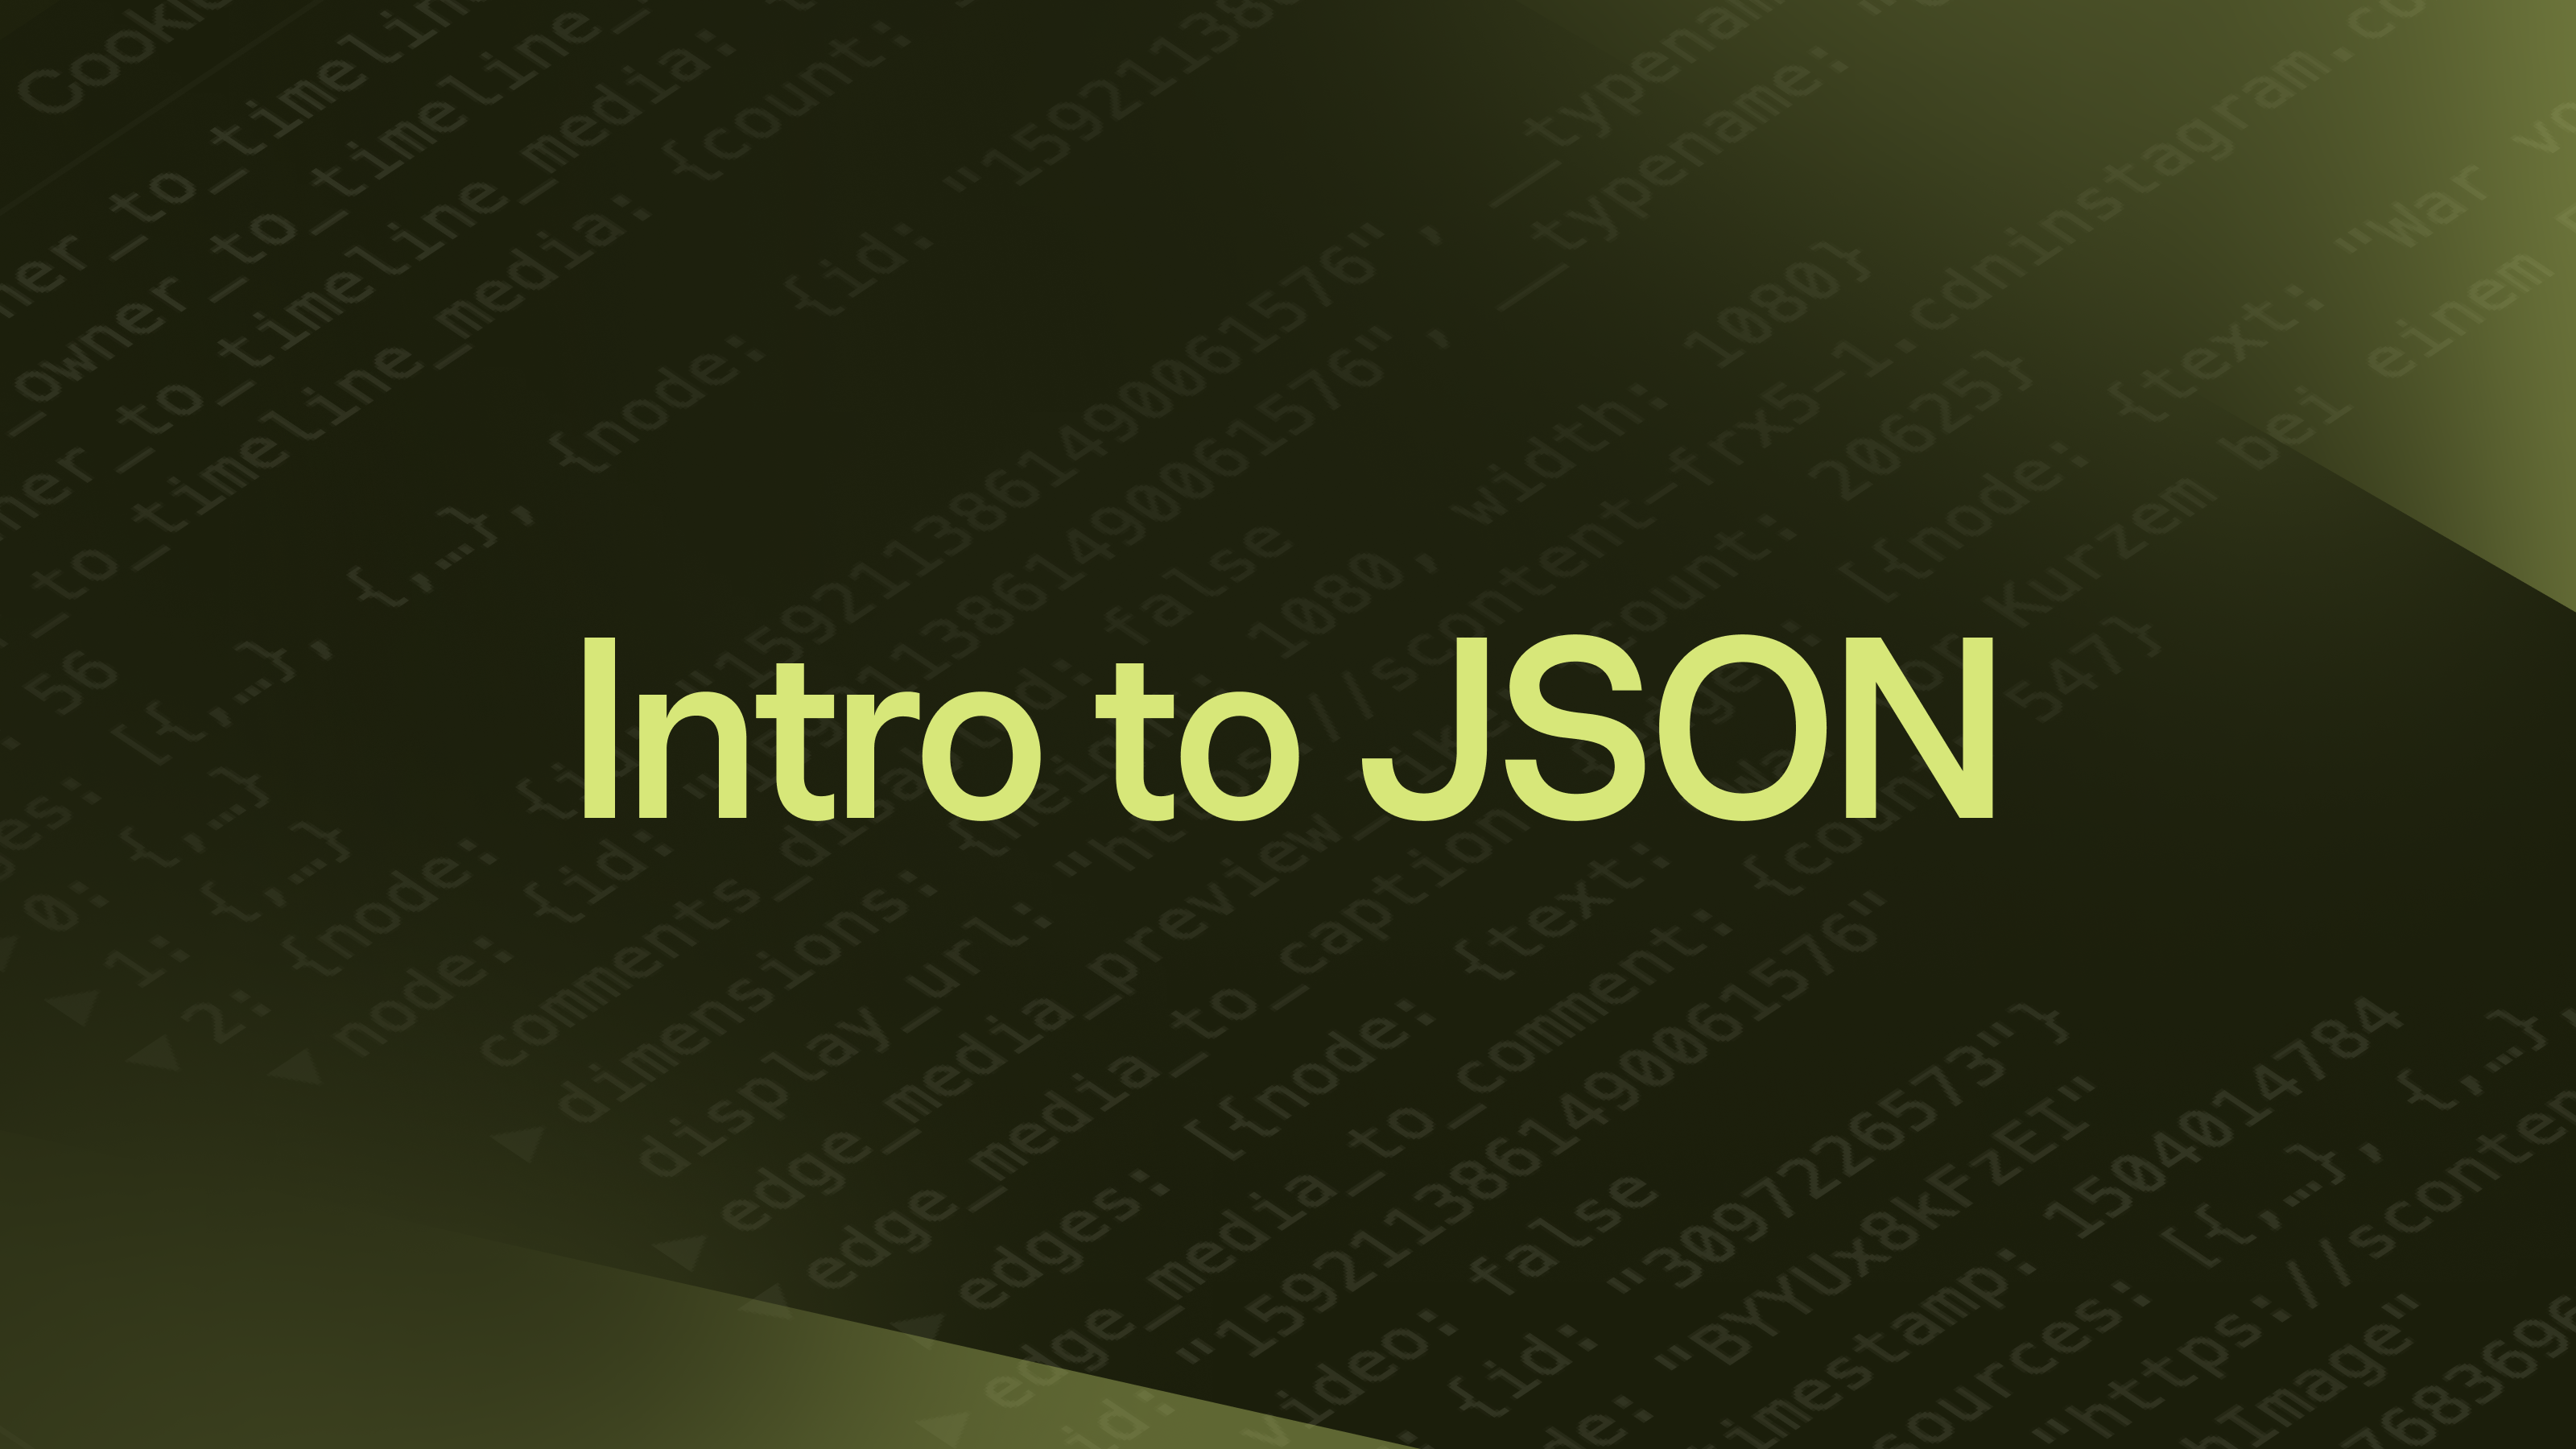 Intro to JSON: The Internet’s Standard Data Format